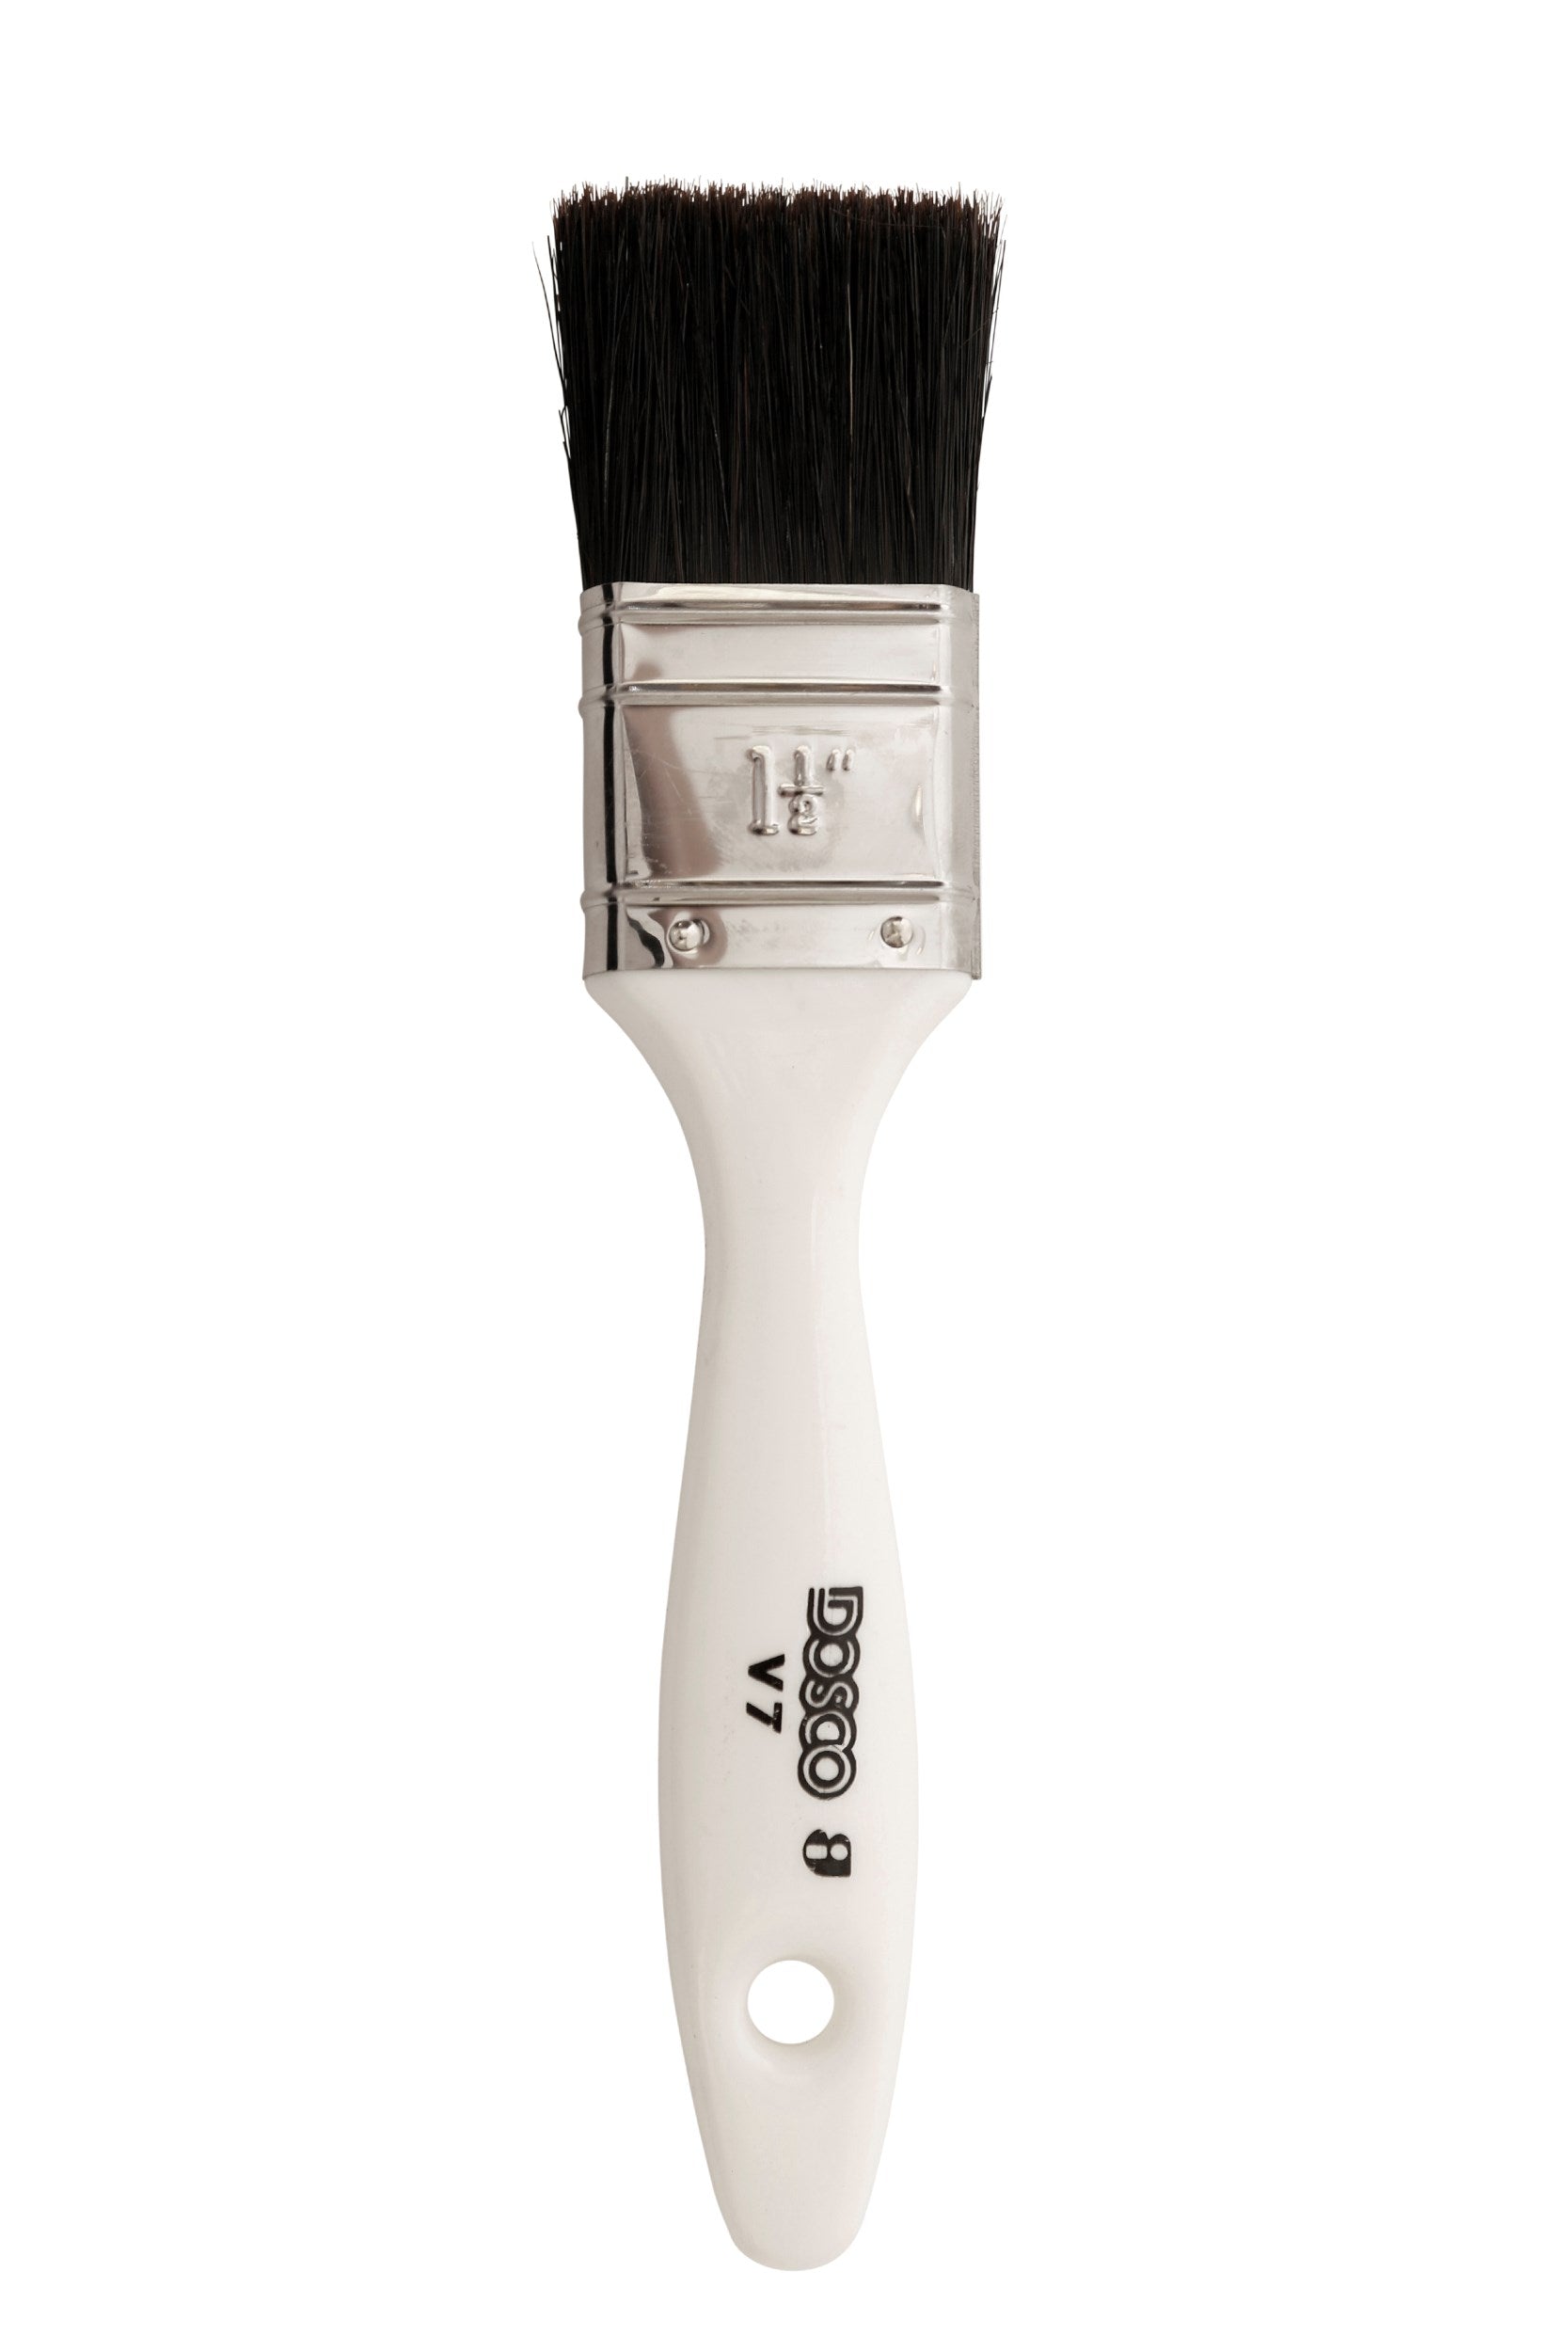 Paint & Decorating | DOSCO All Purpose V7 Paint Brush 0.5 inch by Weirs of Baggot St